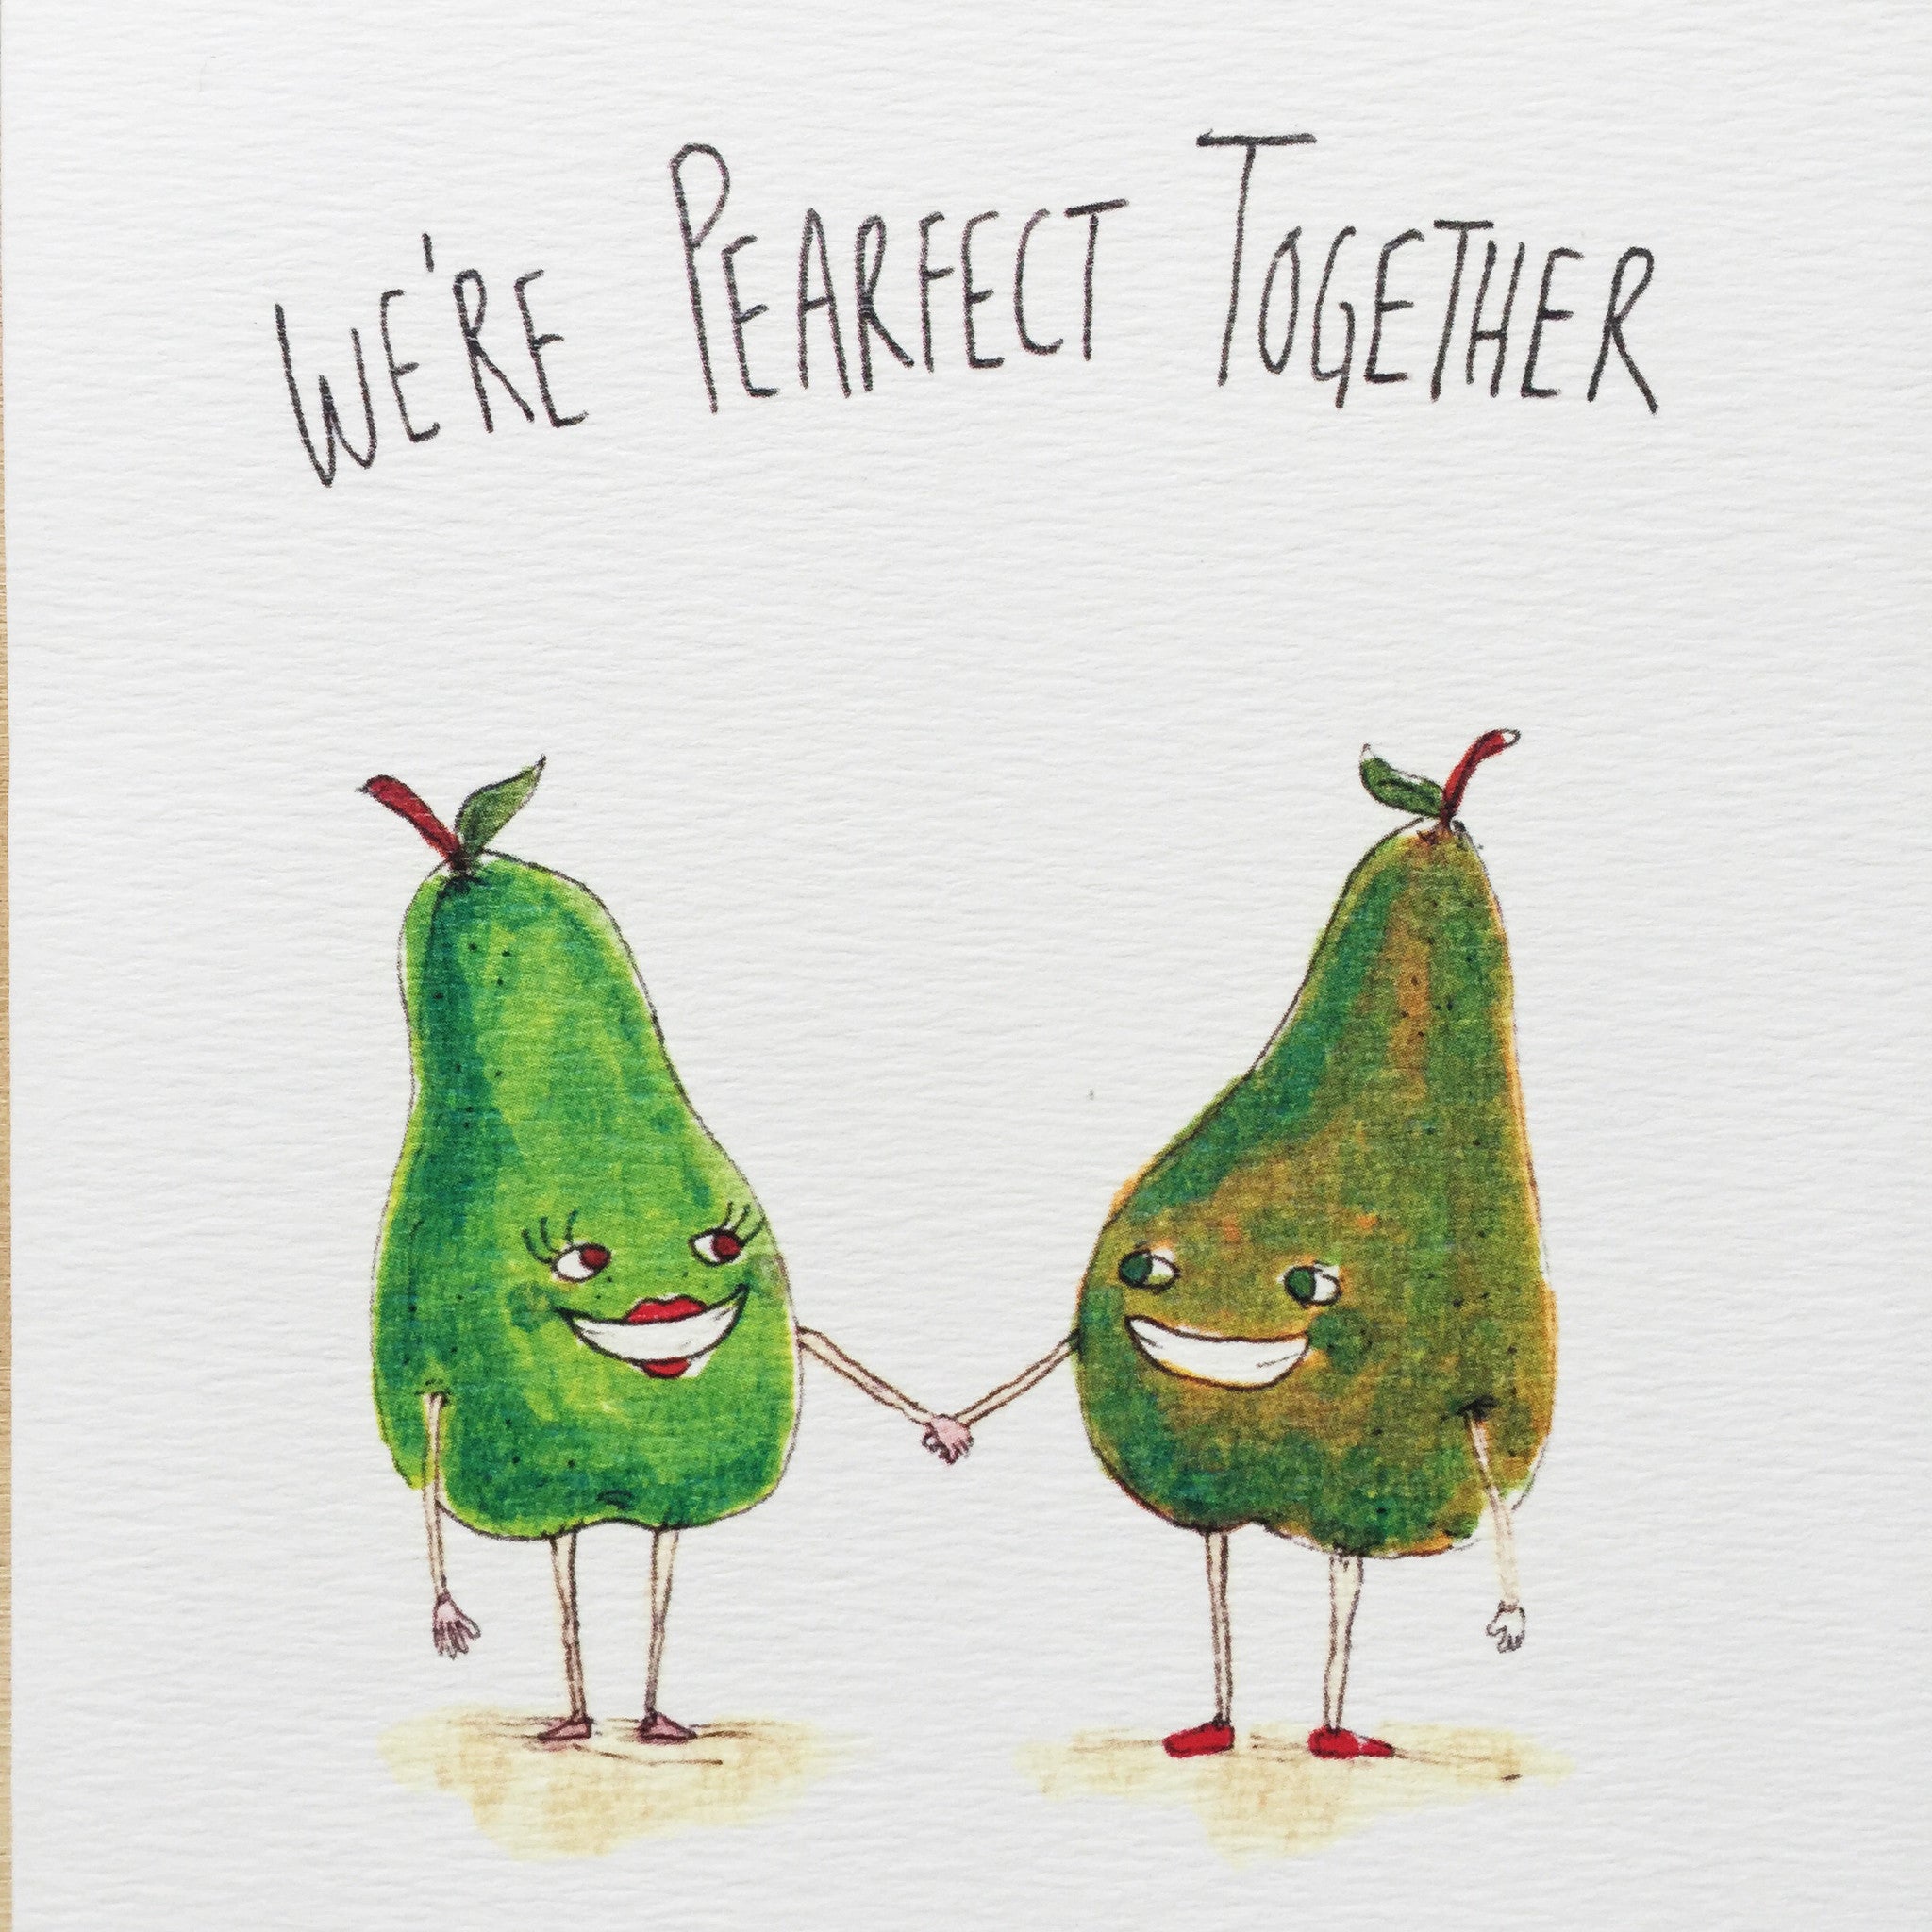 We're Pearfect Together - Well Drawn